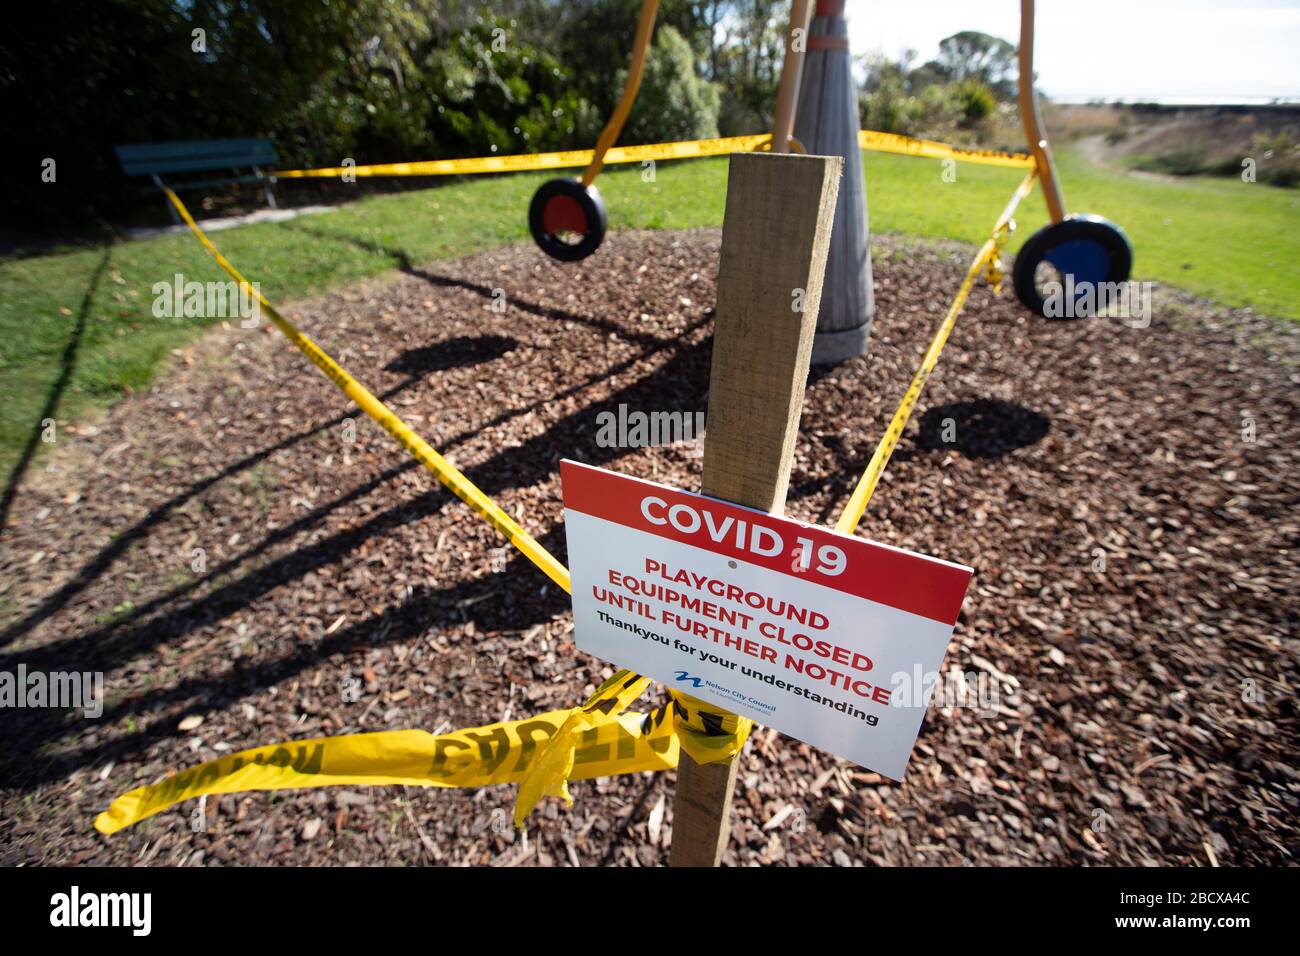 Signs at closed playground due to Covid 19 virus lockdown, Nelson, New Zealand Stock Photo